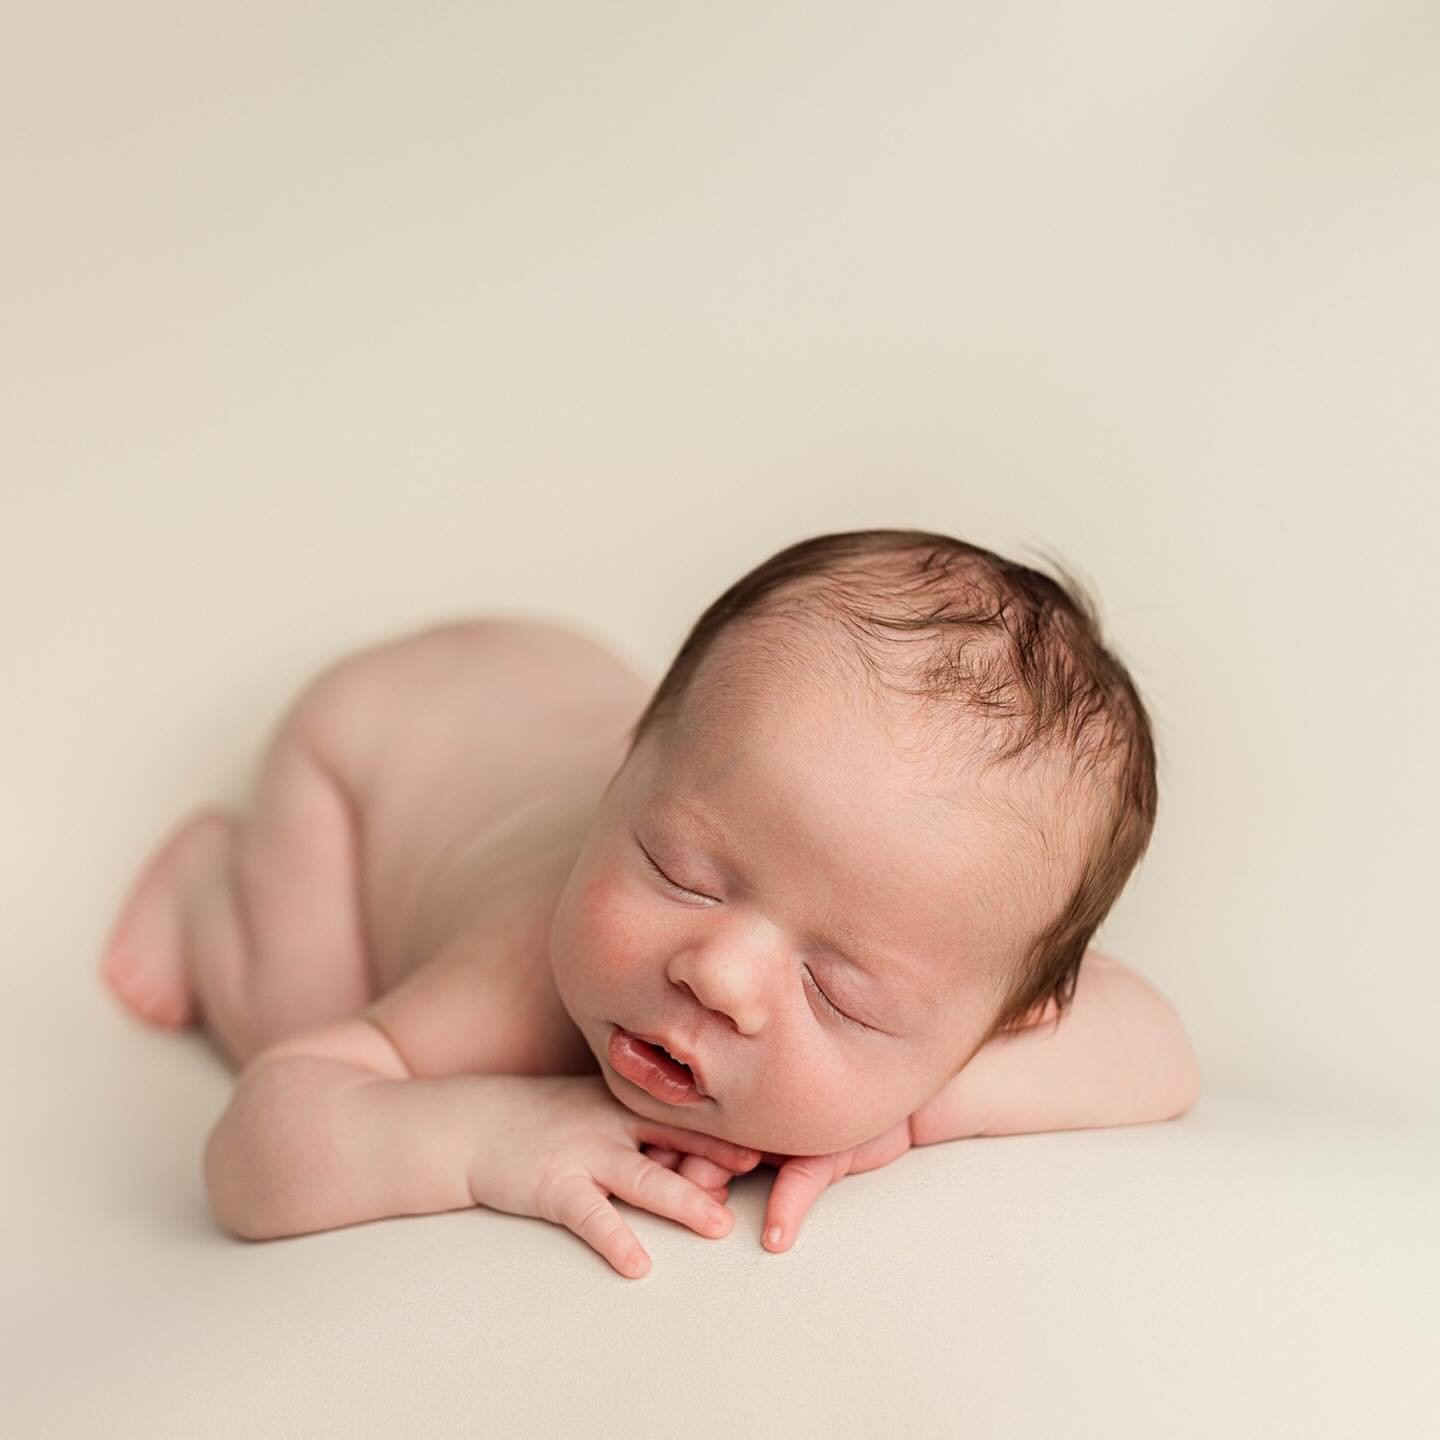 He was really strong for a 4 weeks old, but he snoozed like a pro.
If you&rsquo;re expecting this summer, now&rsquo;s the time to secure your spot for a session with me!
Book based on your due date, and we&rsquo;ll set the date once your baby arrives